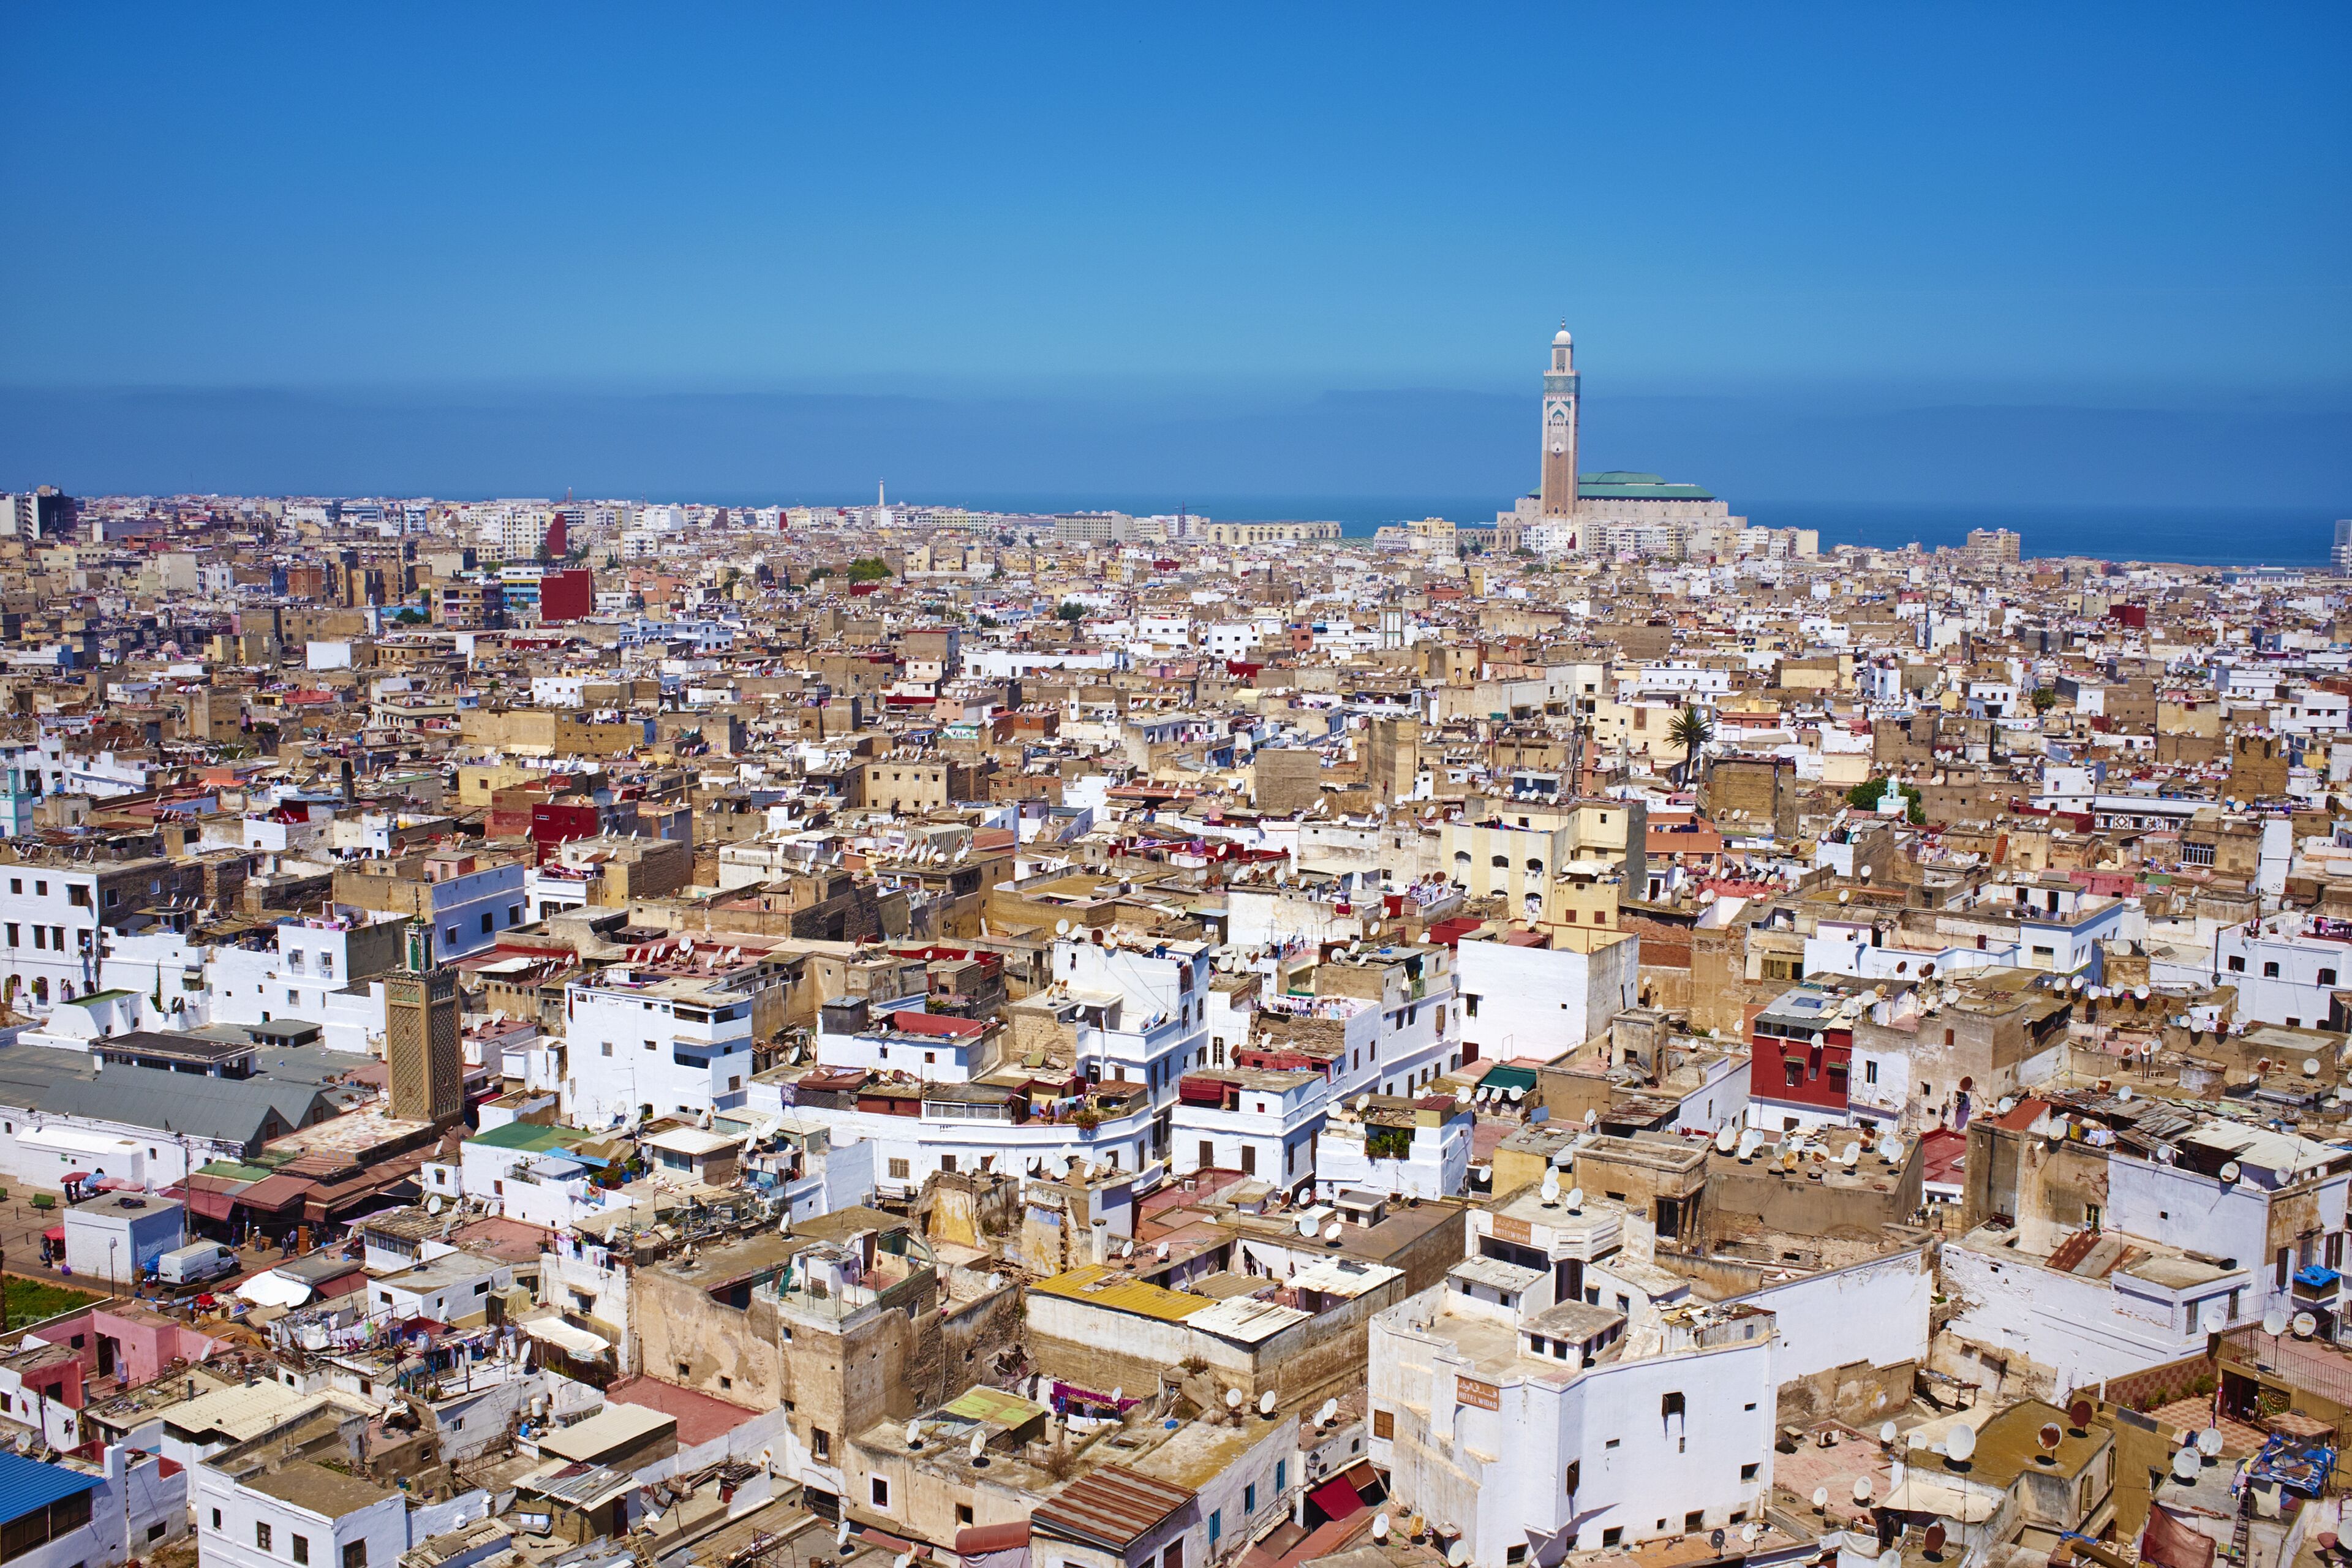 Panoramic view over Casablanca's dense cityscape, with the Hassan II Mosque's minaret standing tall against the blue sea.